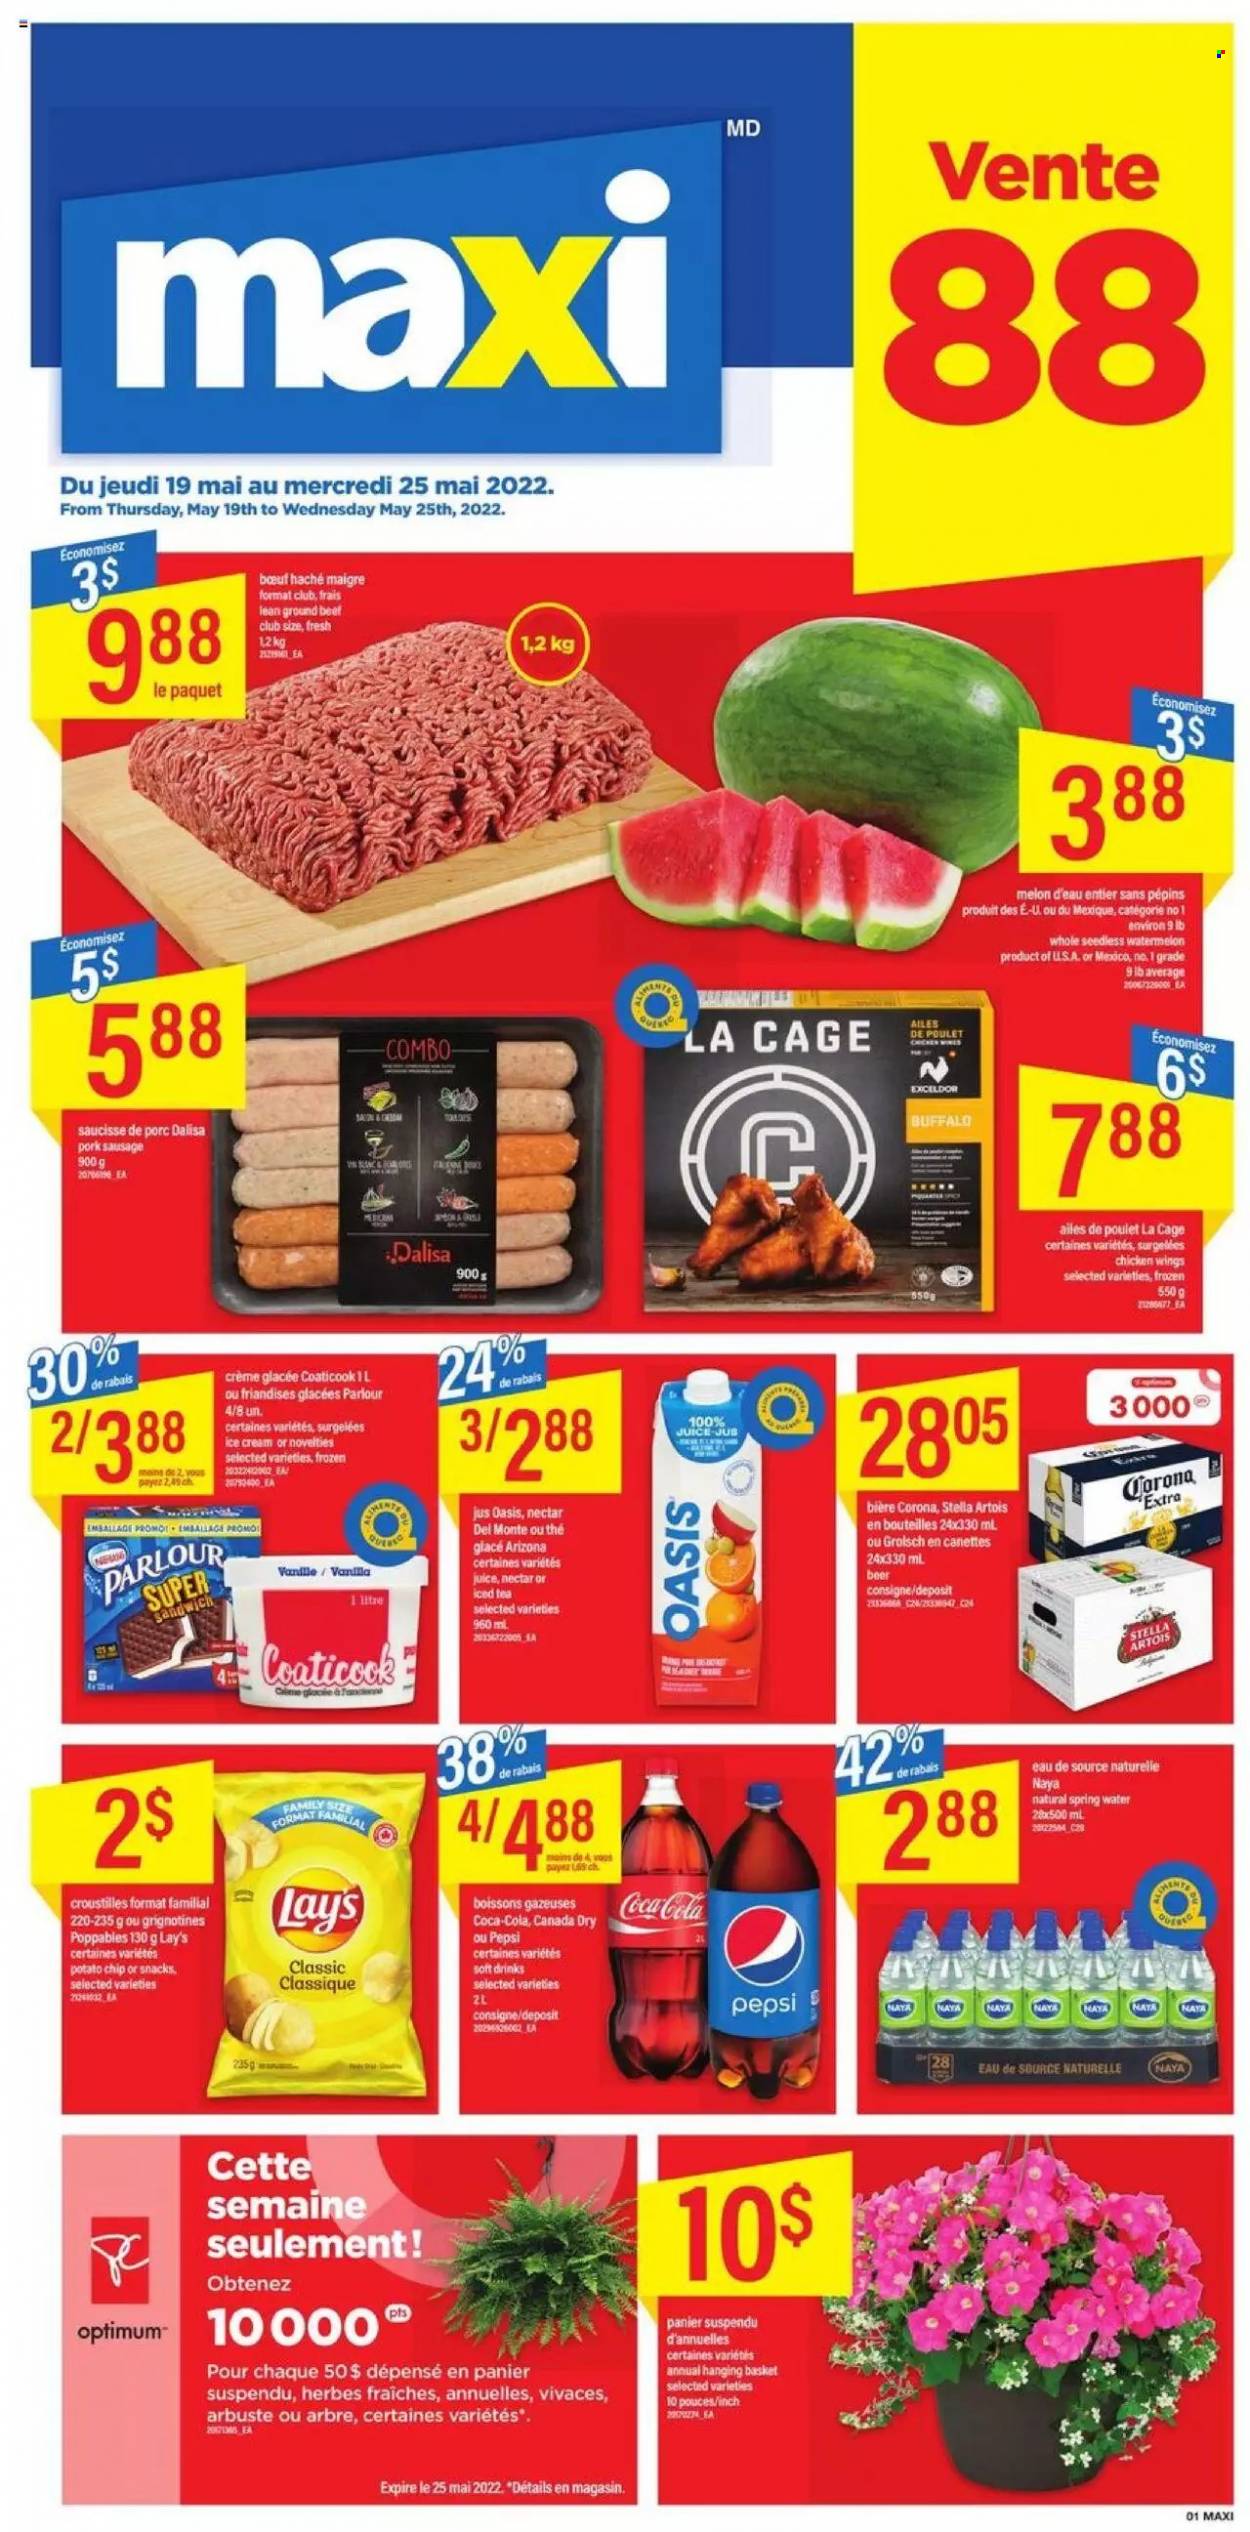 thumbnail - Maxi Flyer - May 19, 2022 - May 25, 2022 - Sales products - watermelon, melons, sausage, pork sausage, ice cream, chicken wings, Lay’s, Canada Dry, Coca-Cola, Pepsi, juice, ice tea, soft drink, AriZona, spring water, beer, Corona Extra, Grolsch, beef meat, ground beef, Stella Artois. Page 1.